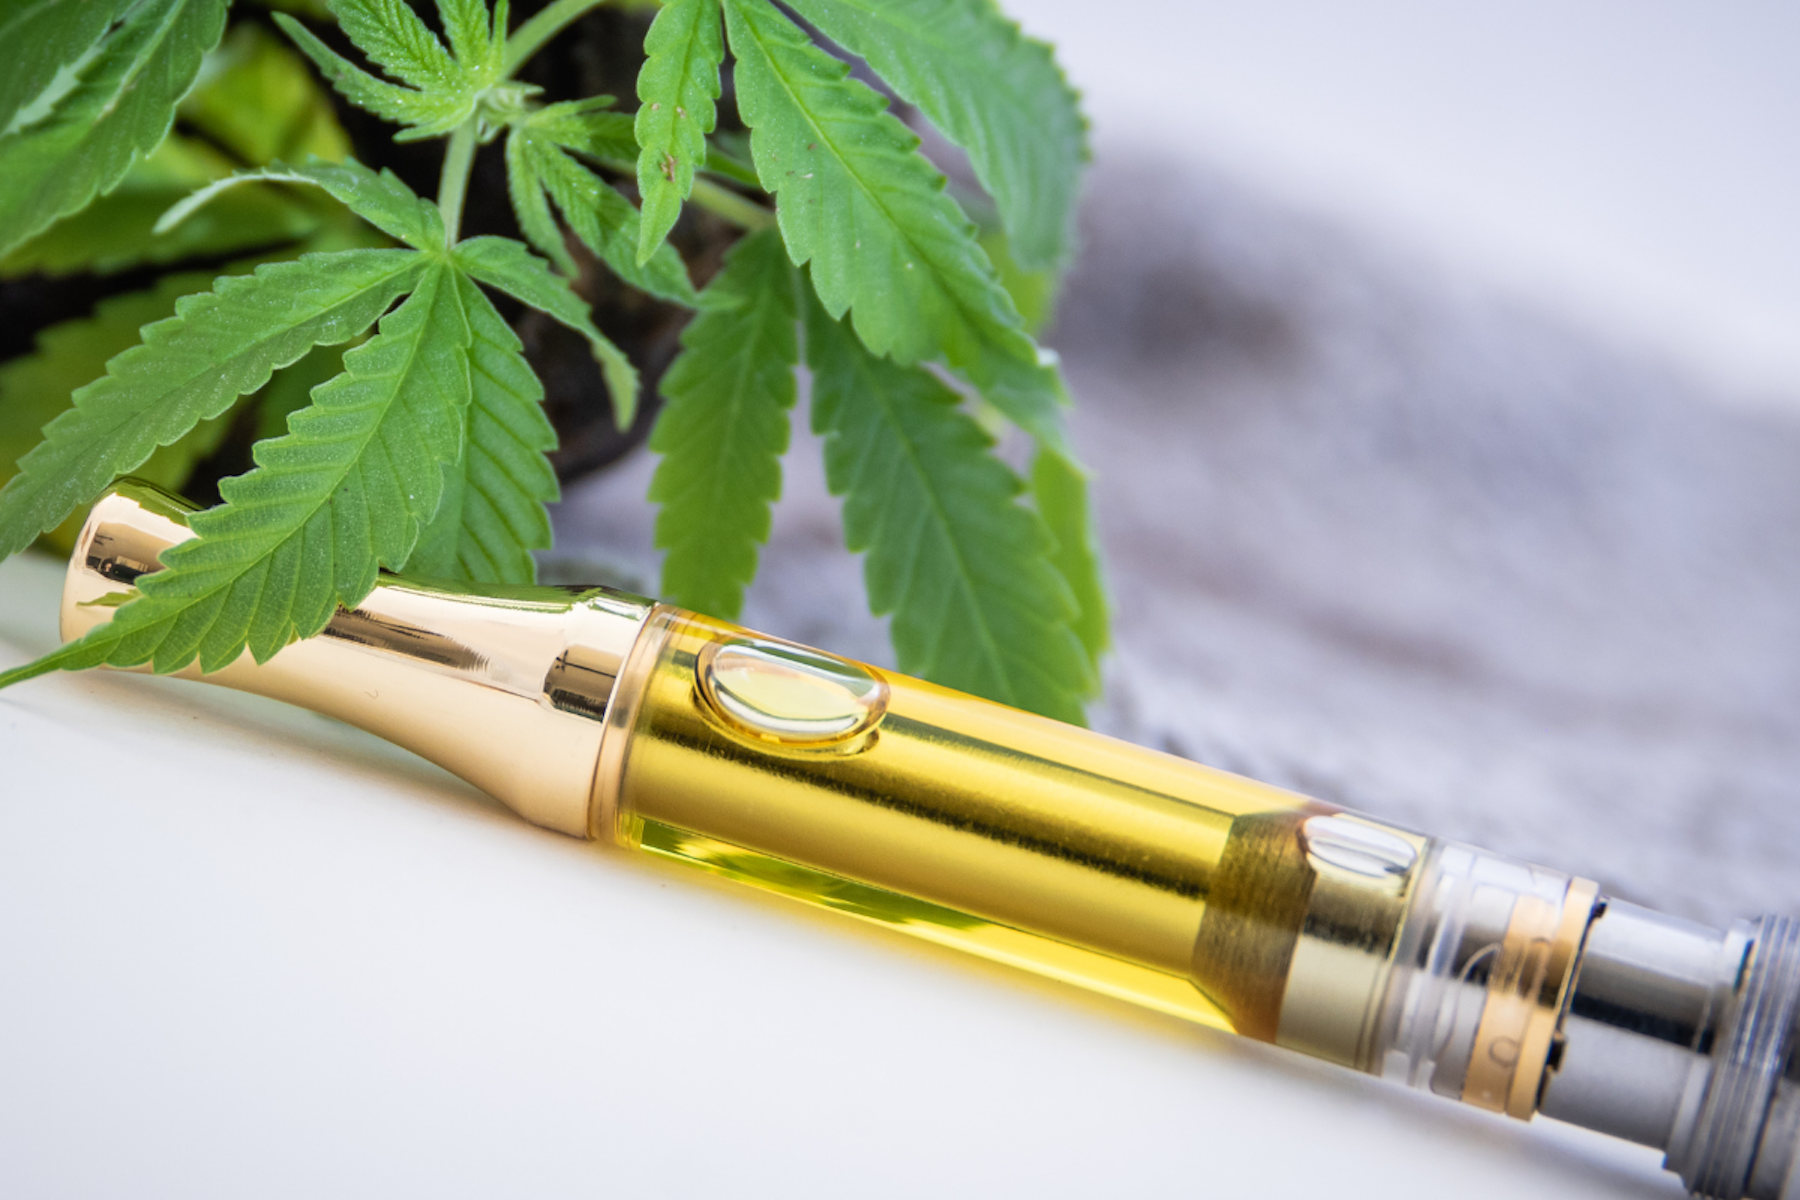 Beneficial Tips To Consider When Purchasing CBD Vape Cartridges